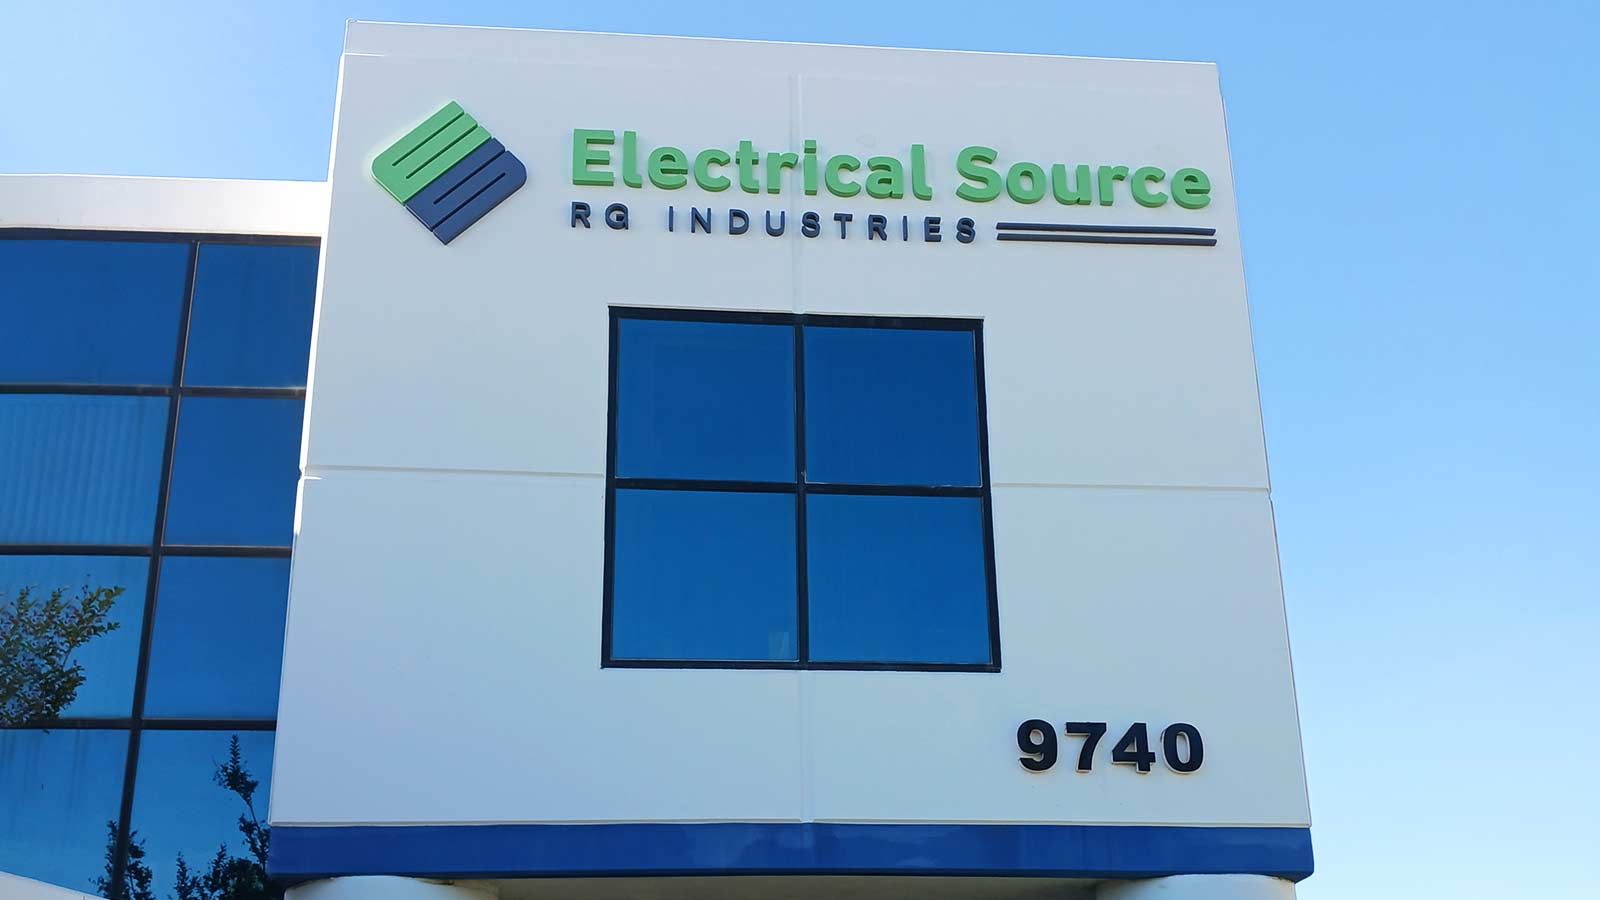 Electrical Source Holdings building signs on the facade